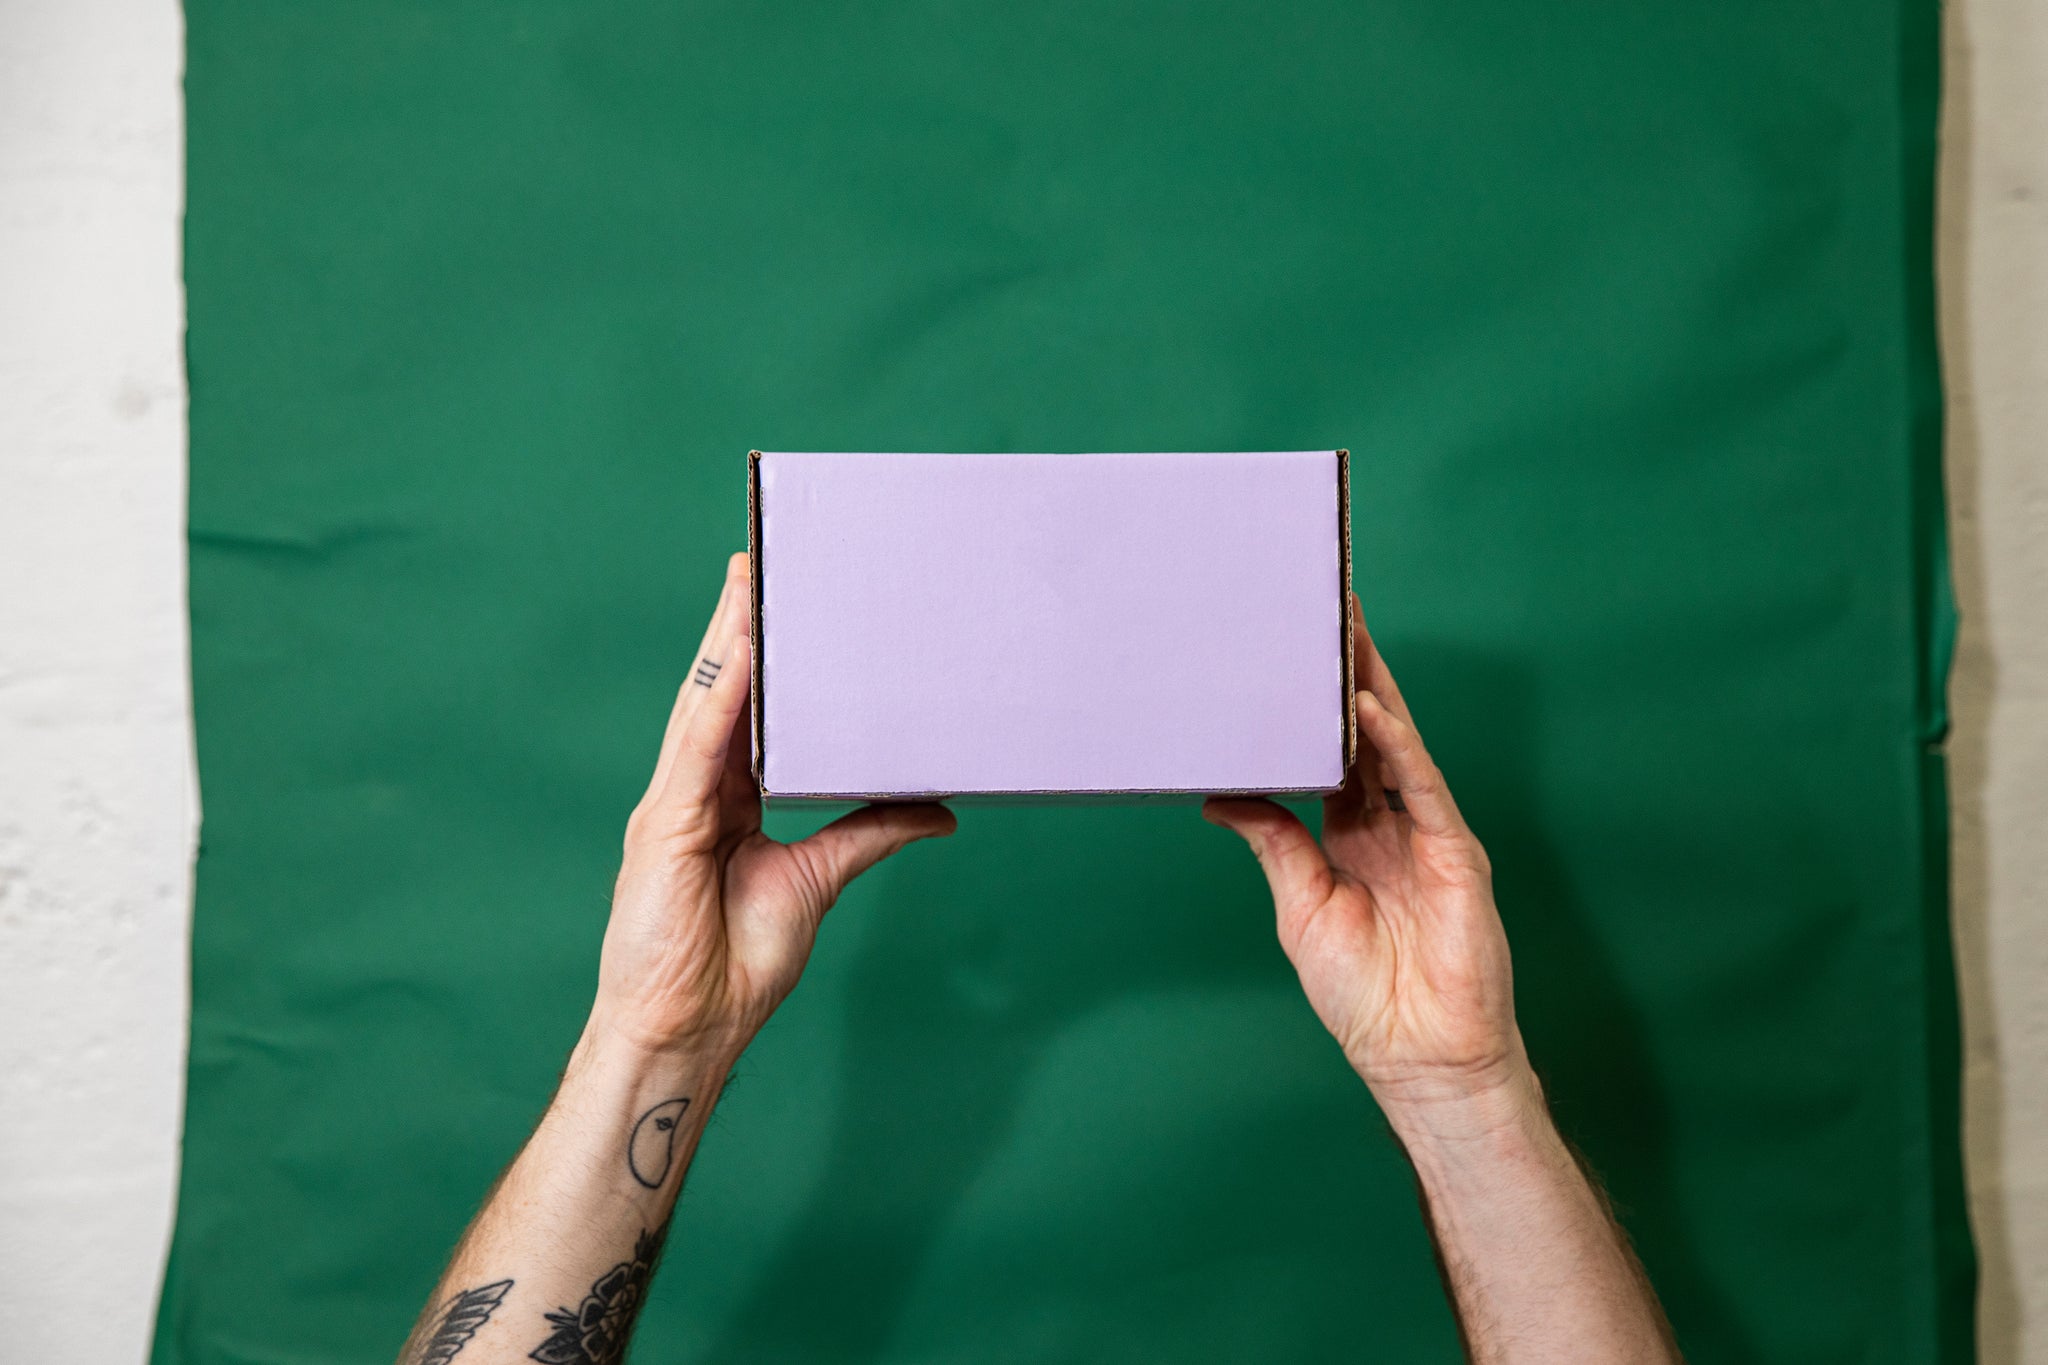 Tattooed hand holding up a box of cans. Green fabric background. The box is purple. 